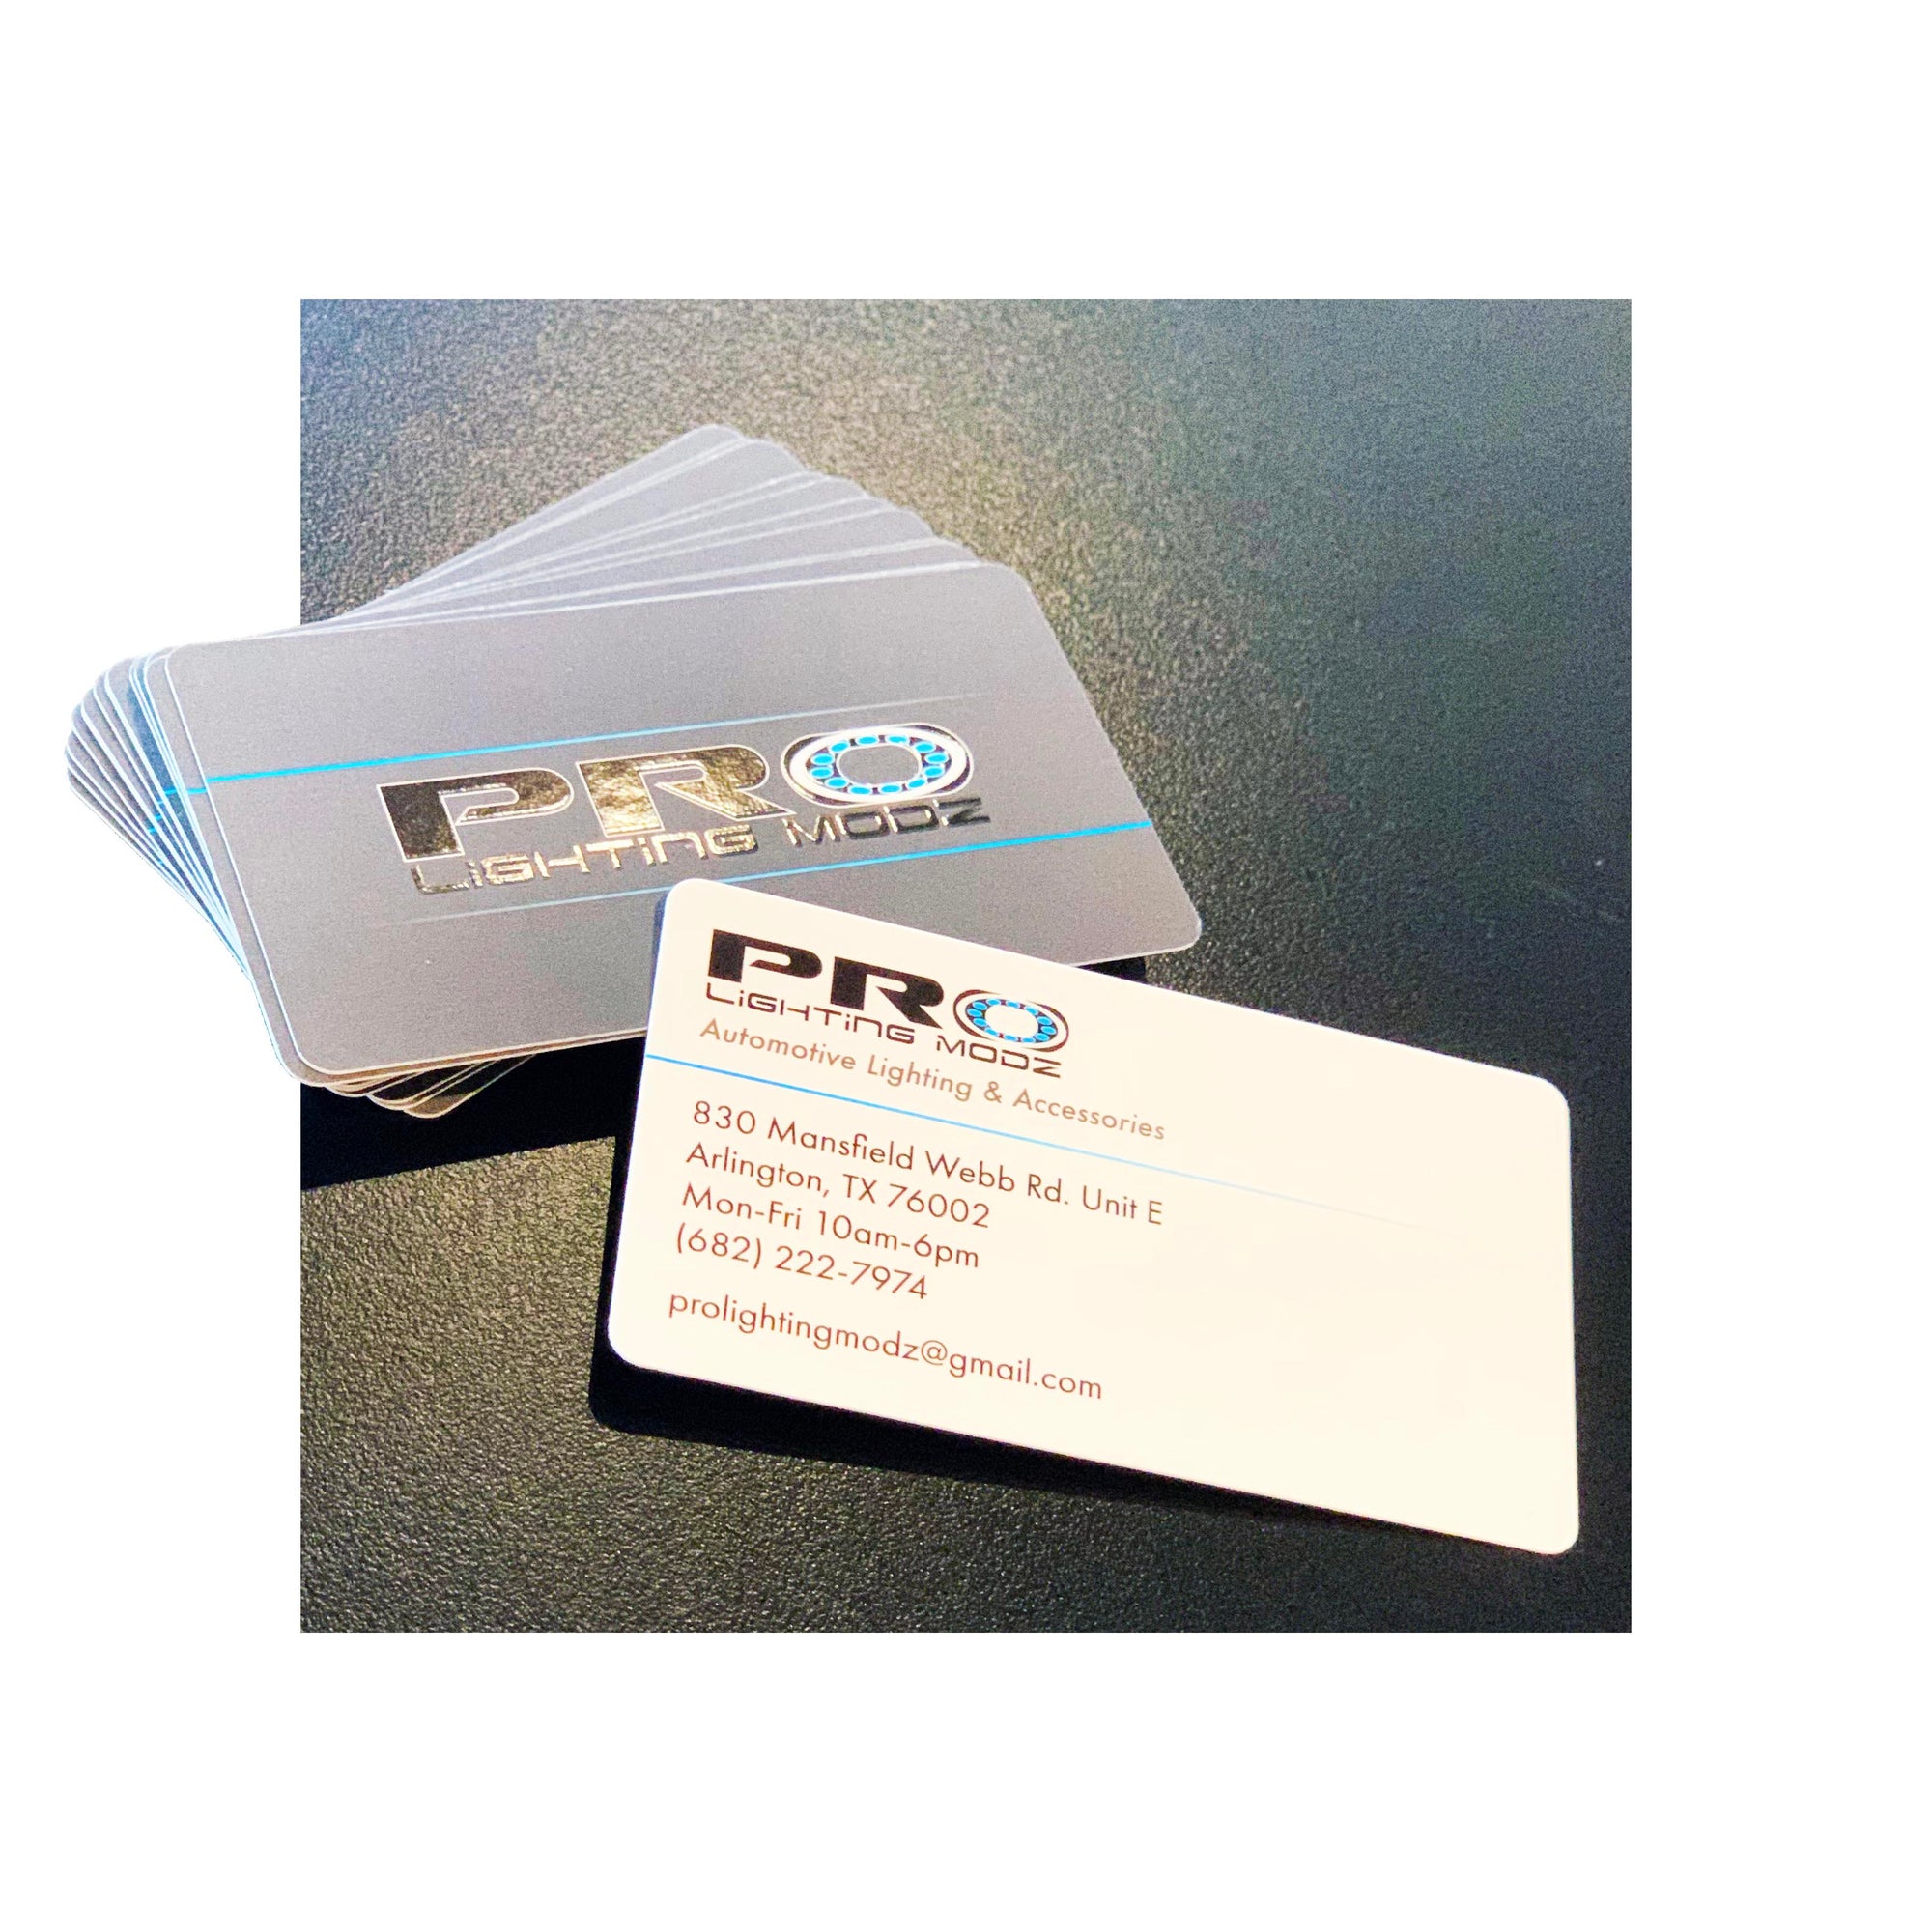 Suede + spot gloss business cards